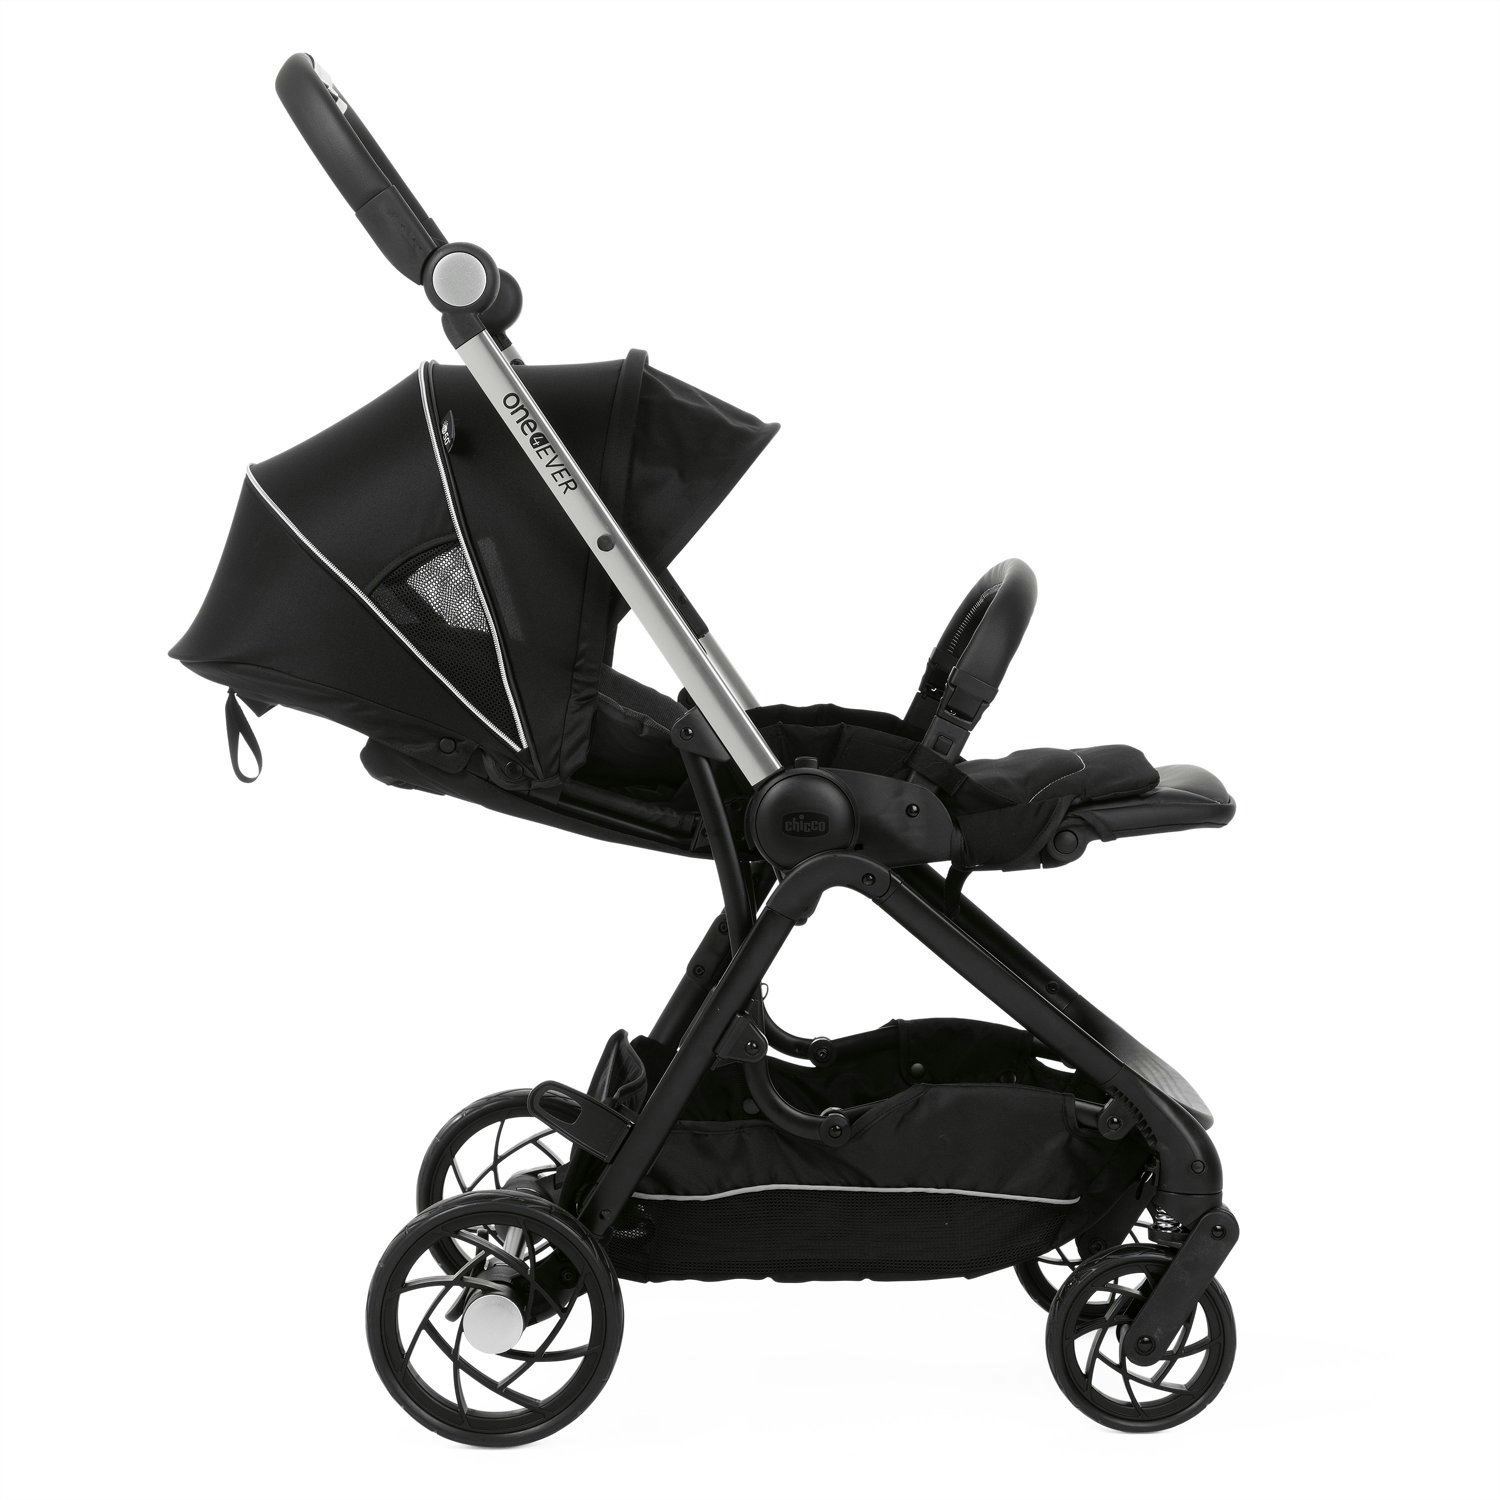 CHICCO Καρότσι 3 Σε 1 One4Ever Light Pirate Black